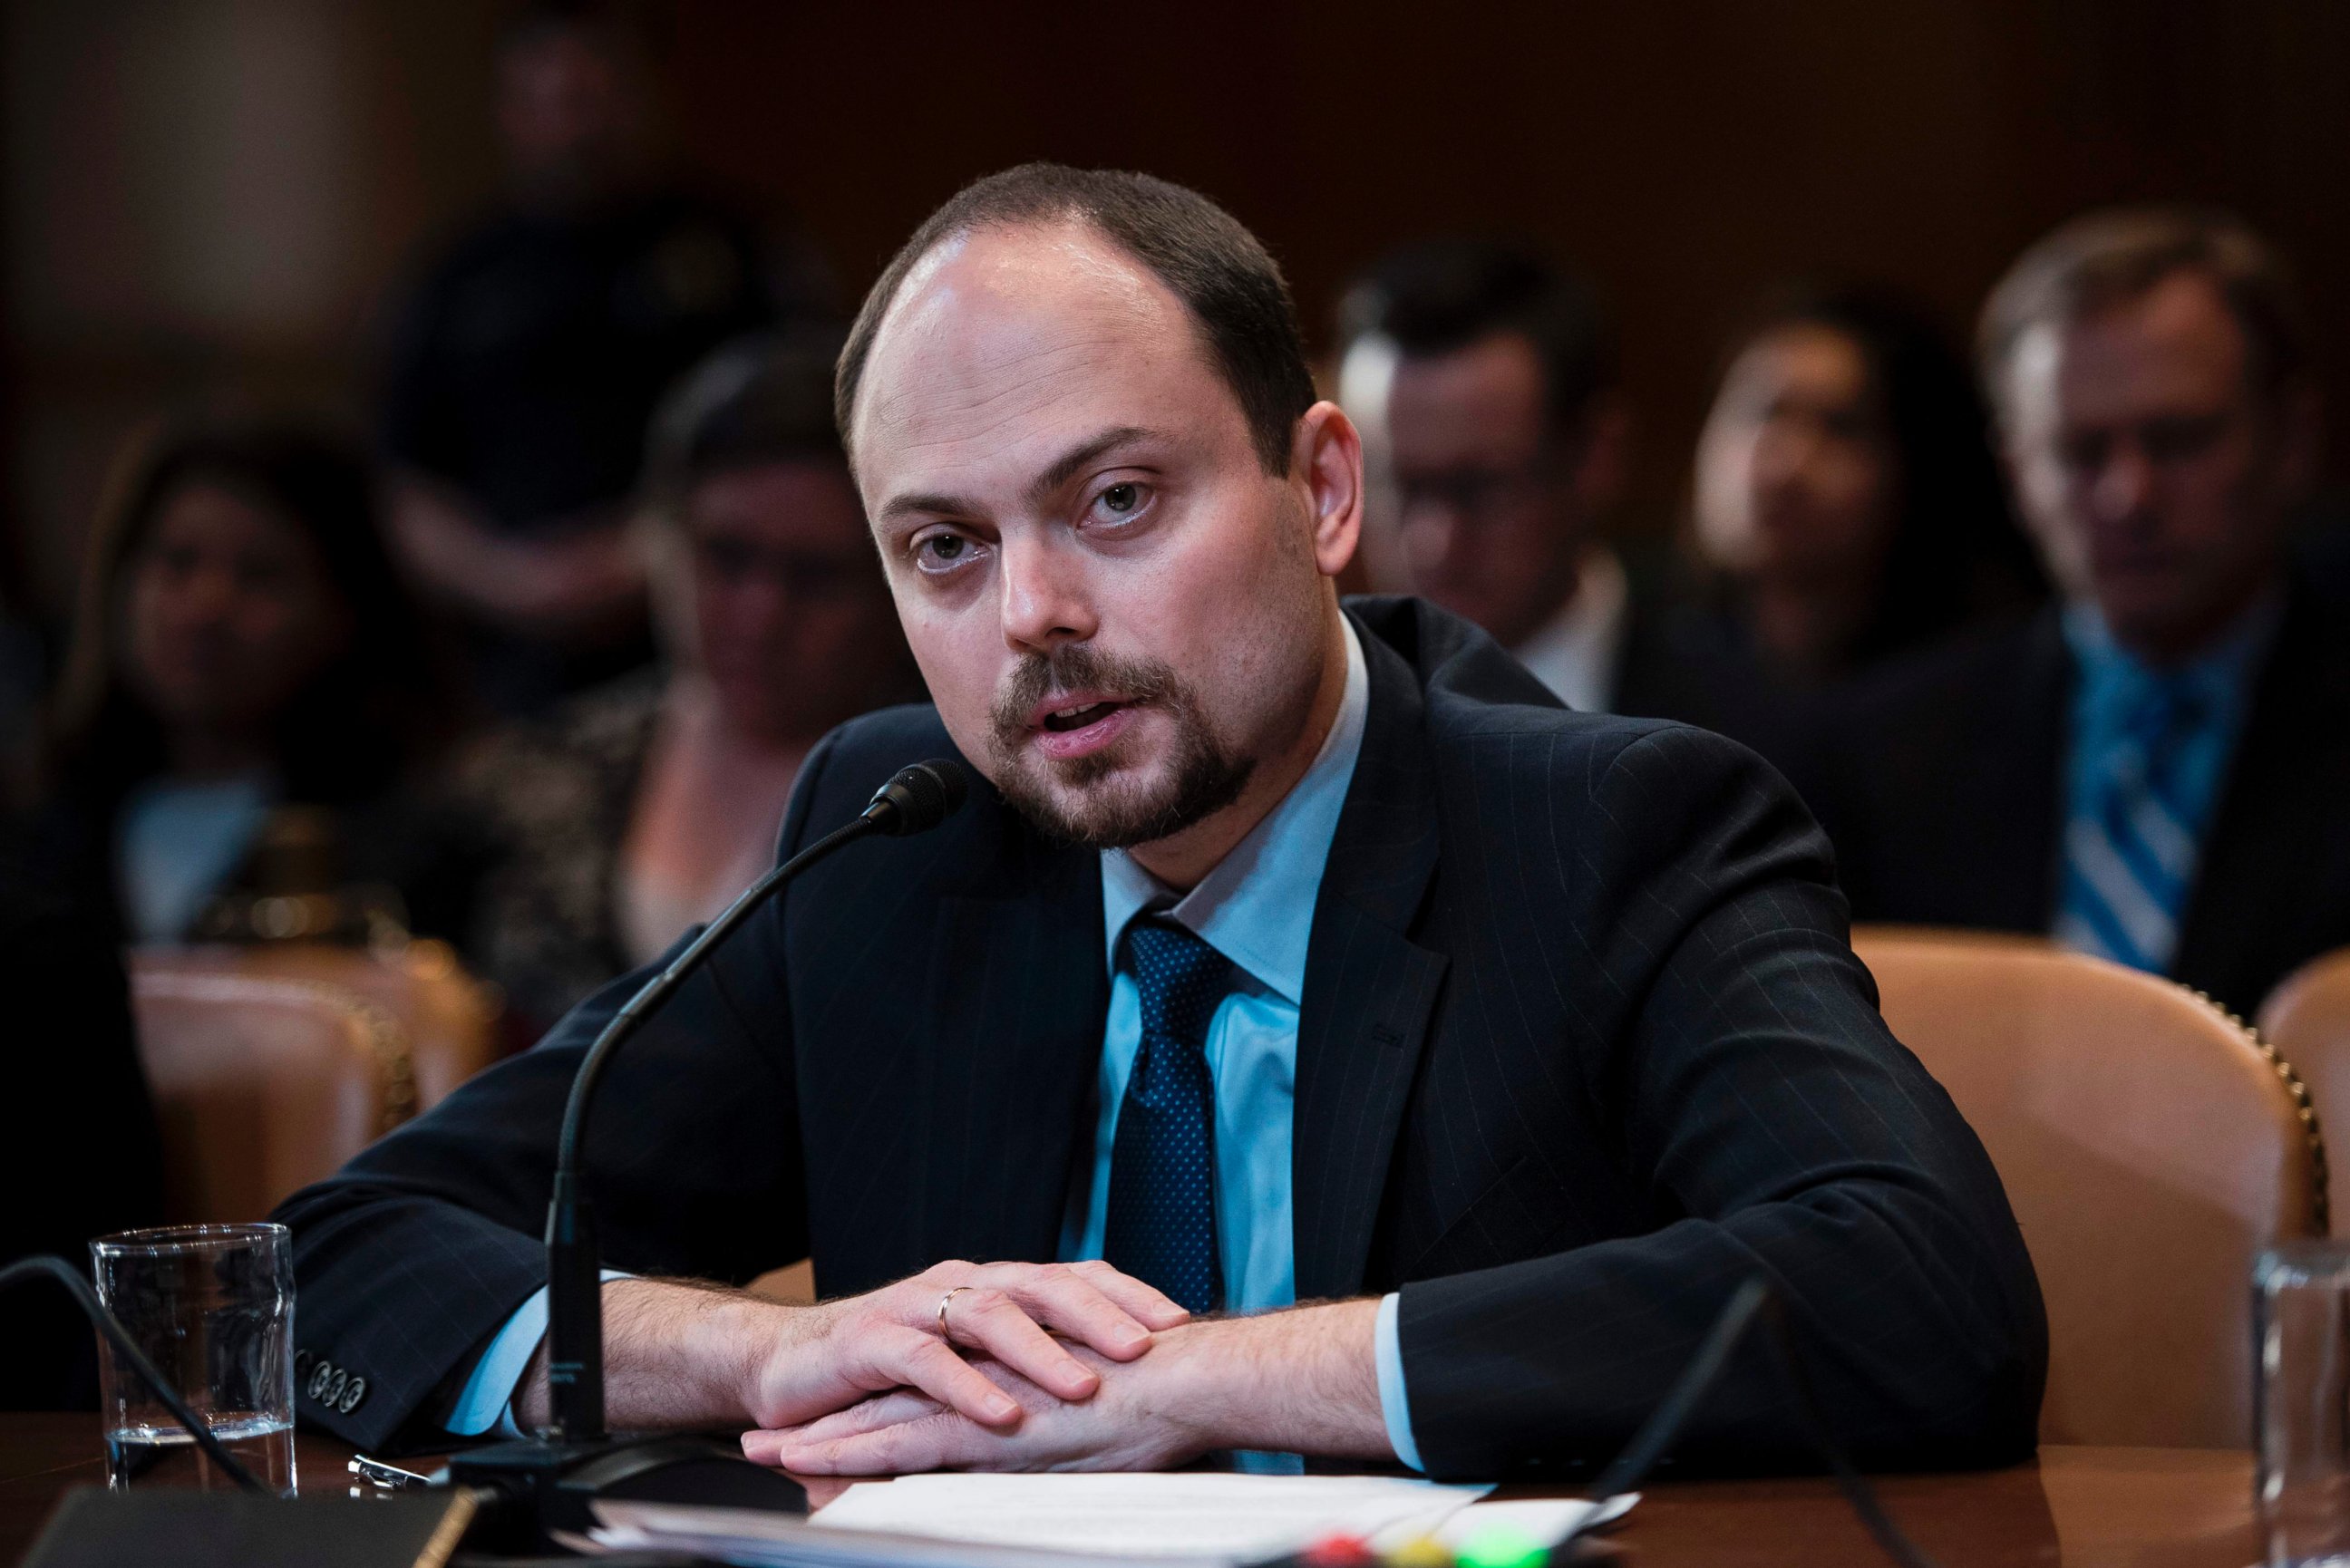 PHOTO: Russian opposition politician Vladimir Kara-Murza testifies on Capitol Hill in Washington, March 29, 2017, before the Senate Appropriation Committee hearing on "Civil Society Perspectives on Russia."